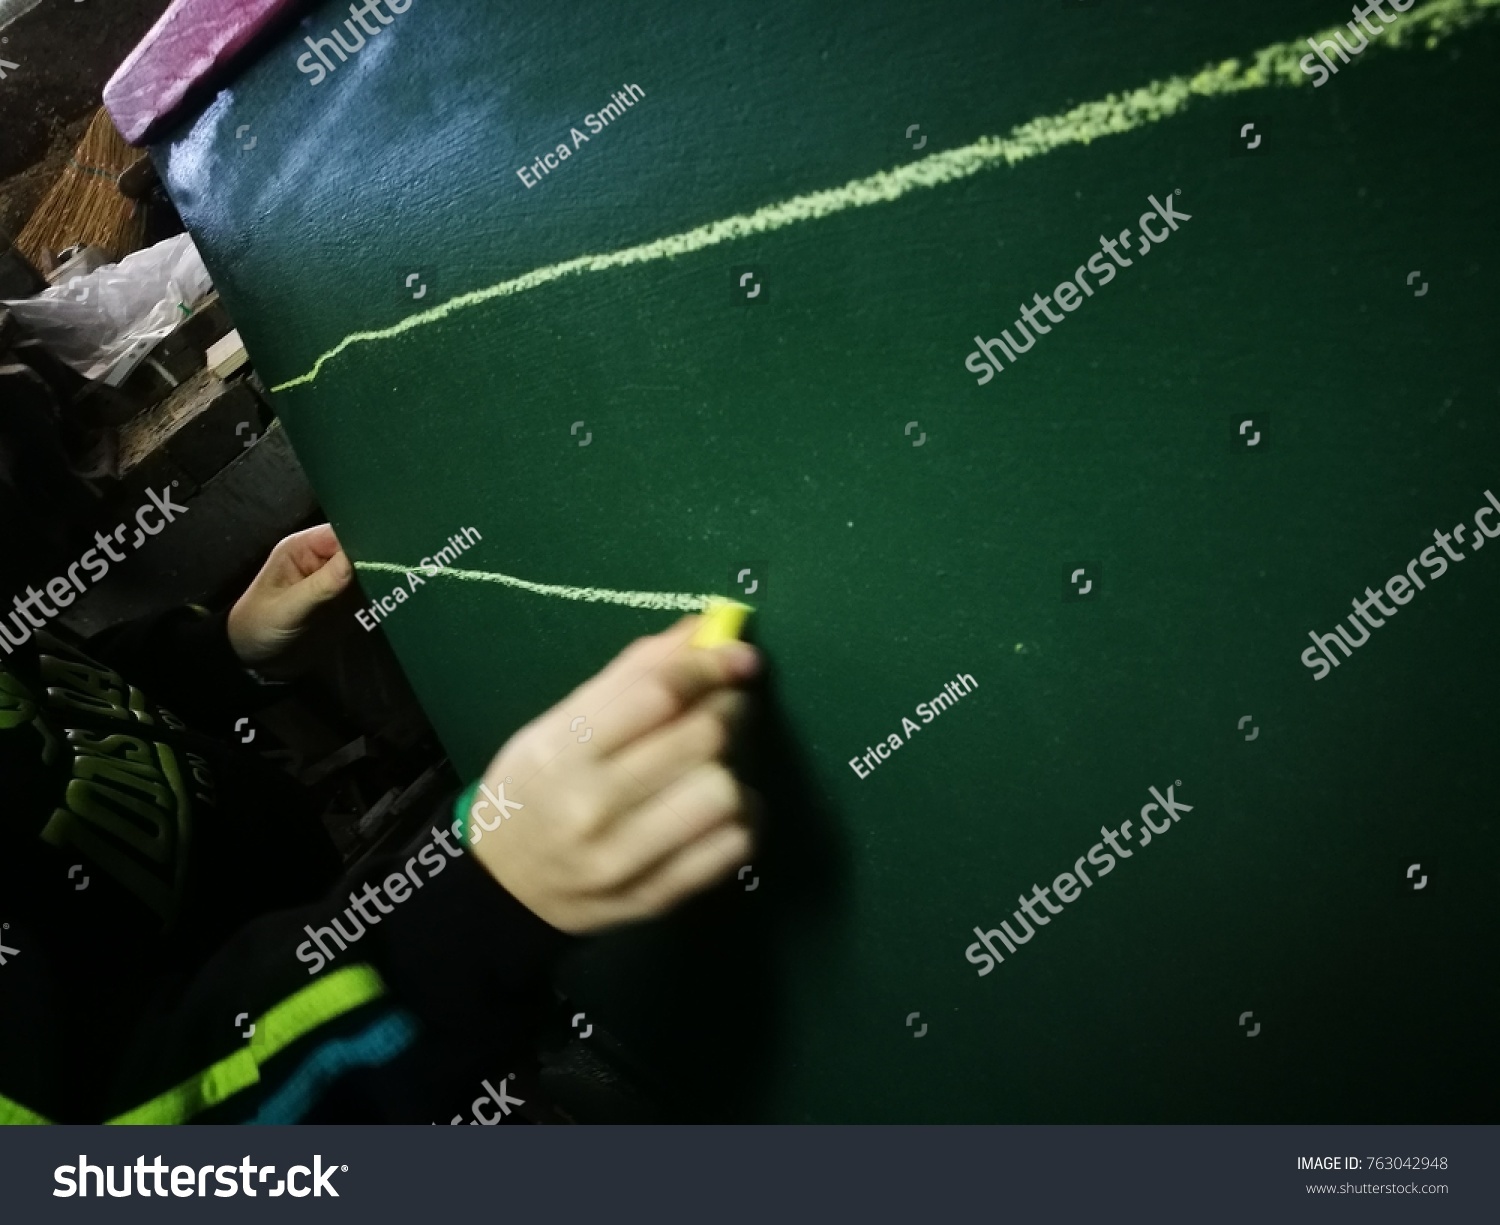 School life. A pupil is lining on a chalkboard. Yellow chalk is in use. Writing lession. Lines. #763042948